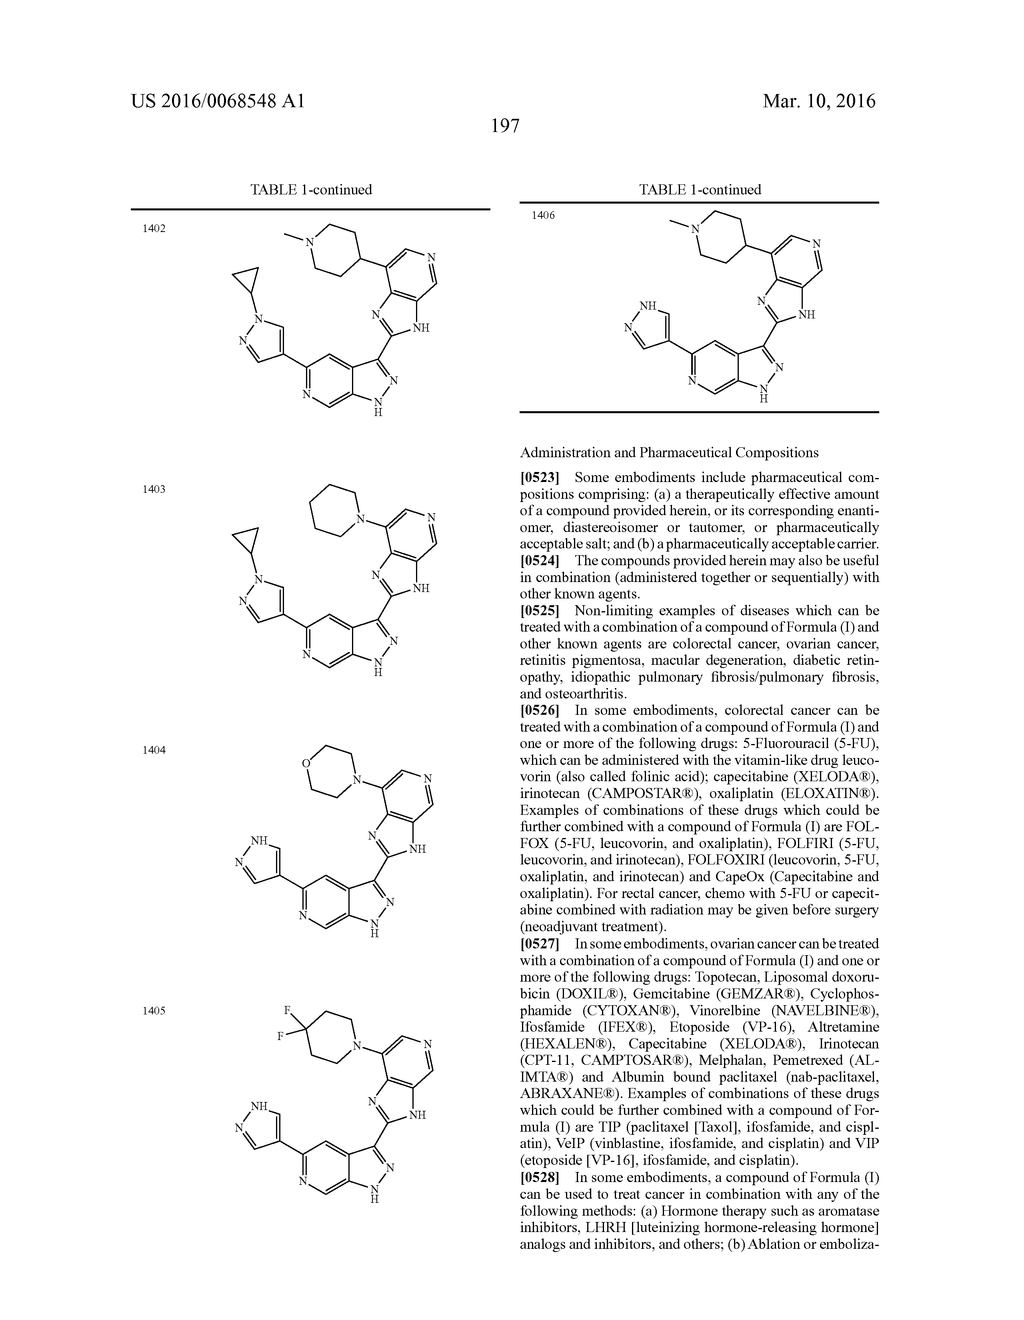 3-(3H-IMIDAZO[4,5-C]PYRIDIN-2-YL)-1H-PYRAZOLO[3,4-C]PYRIDINE AND     THERAPEUTIC USES THEREOF - diagram, schematic, and image 198